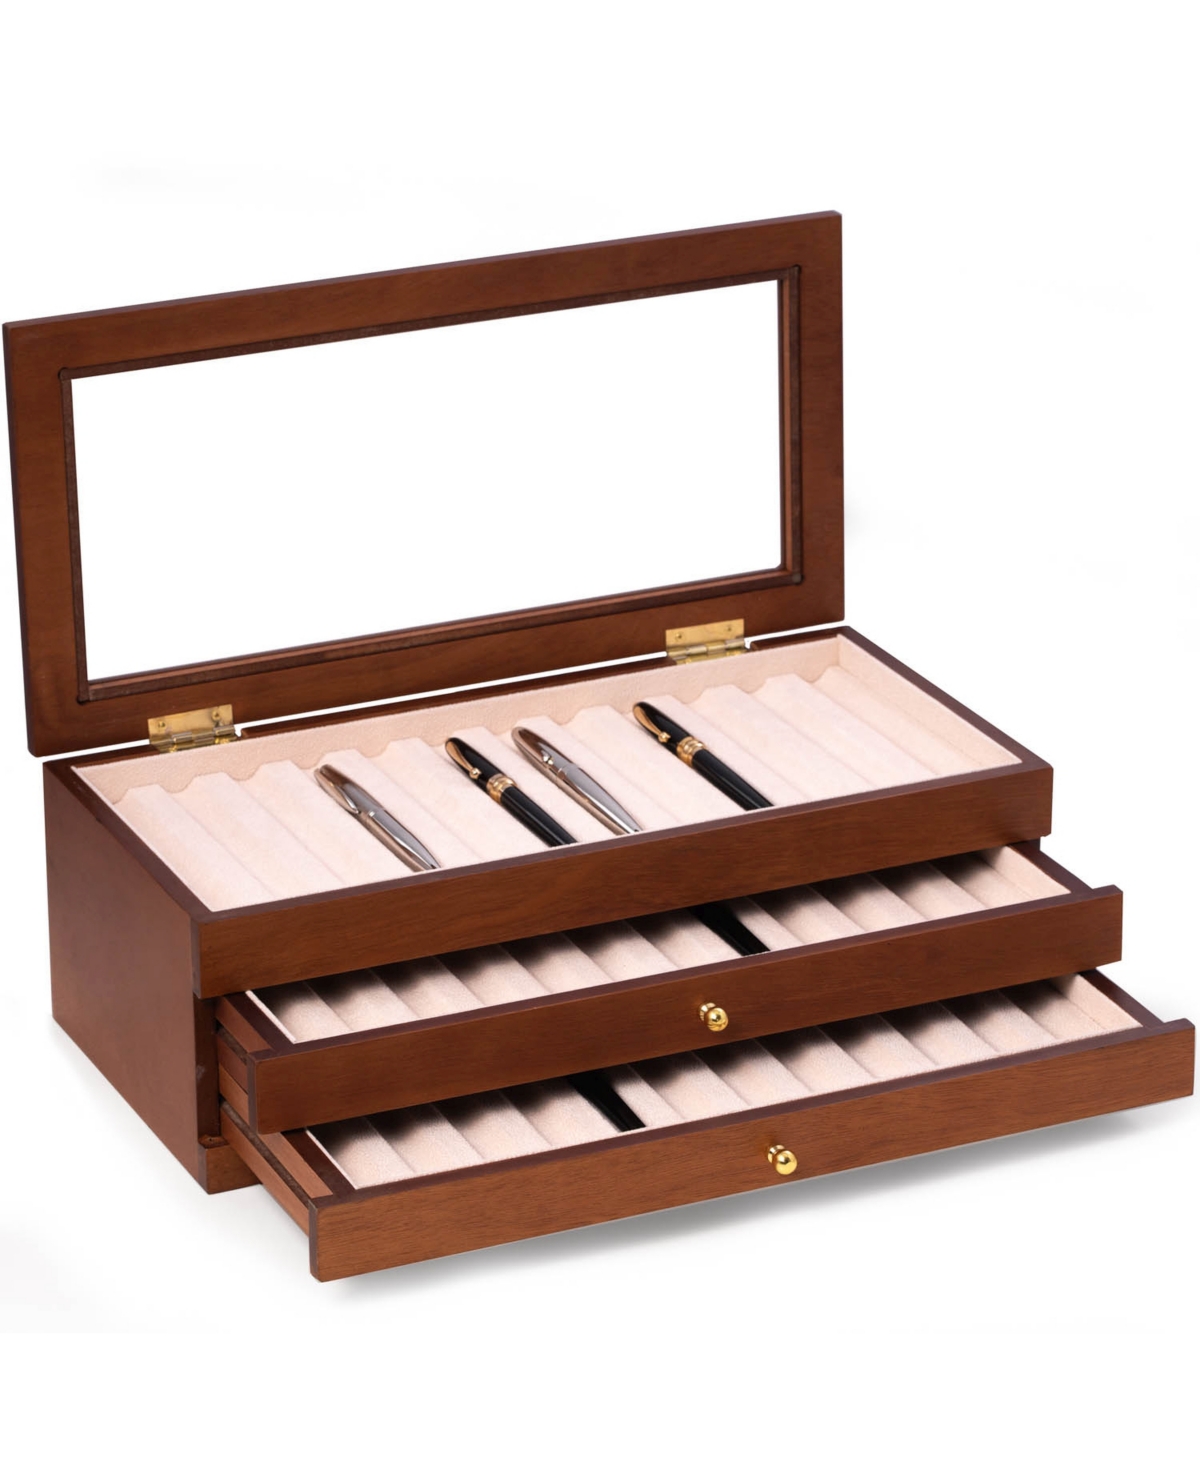 3 Level 36 Pen Storage Case with Glass Top - Multi